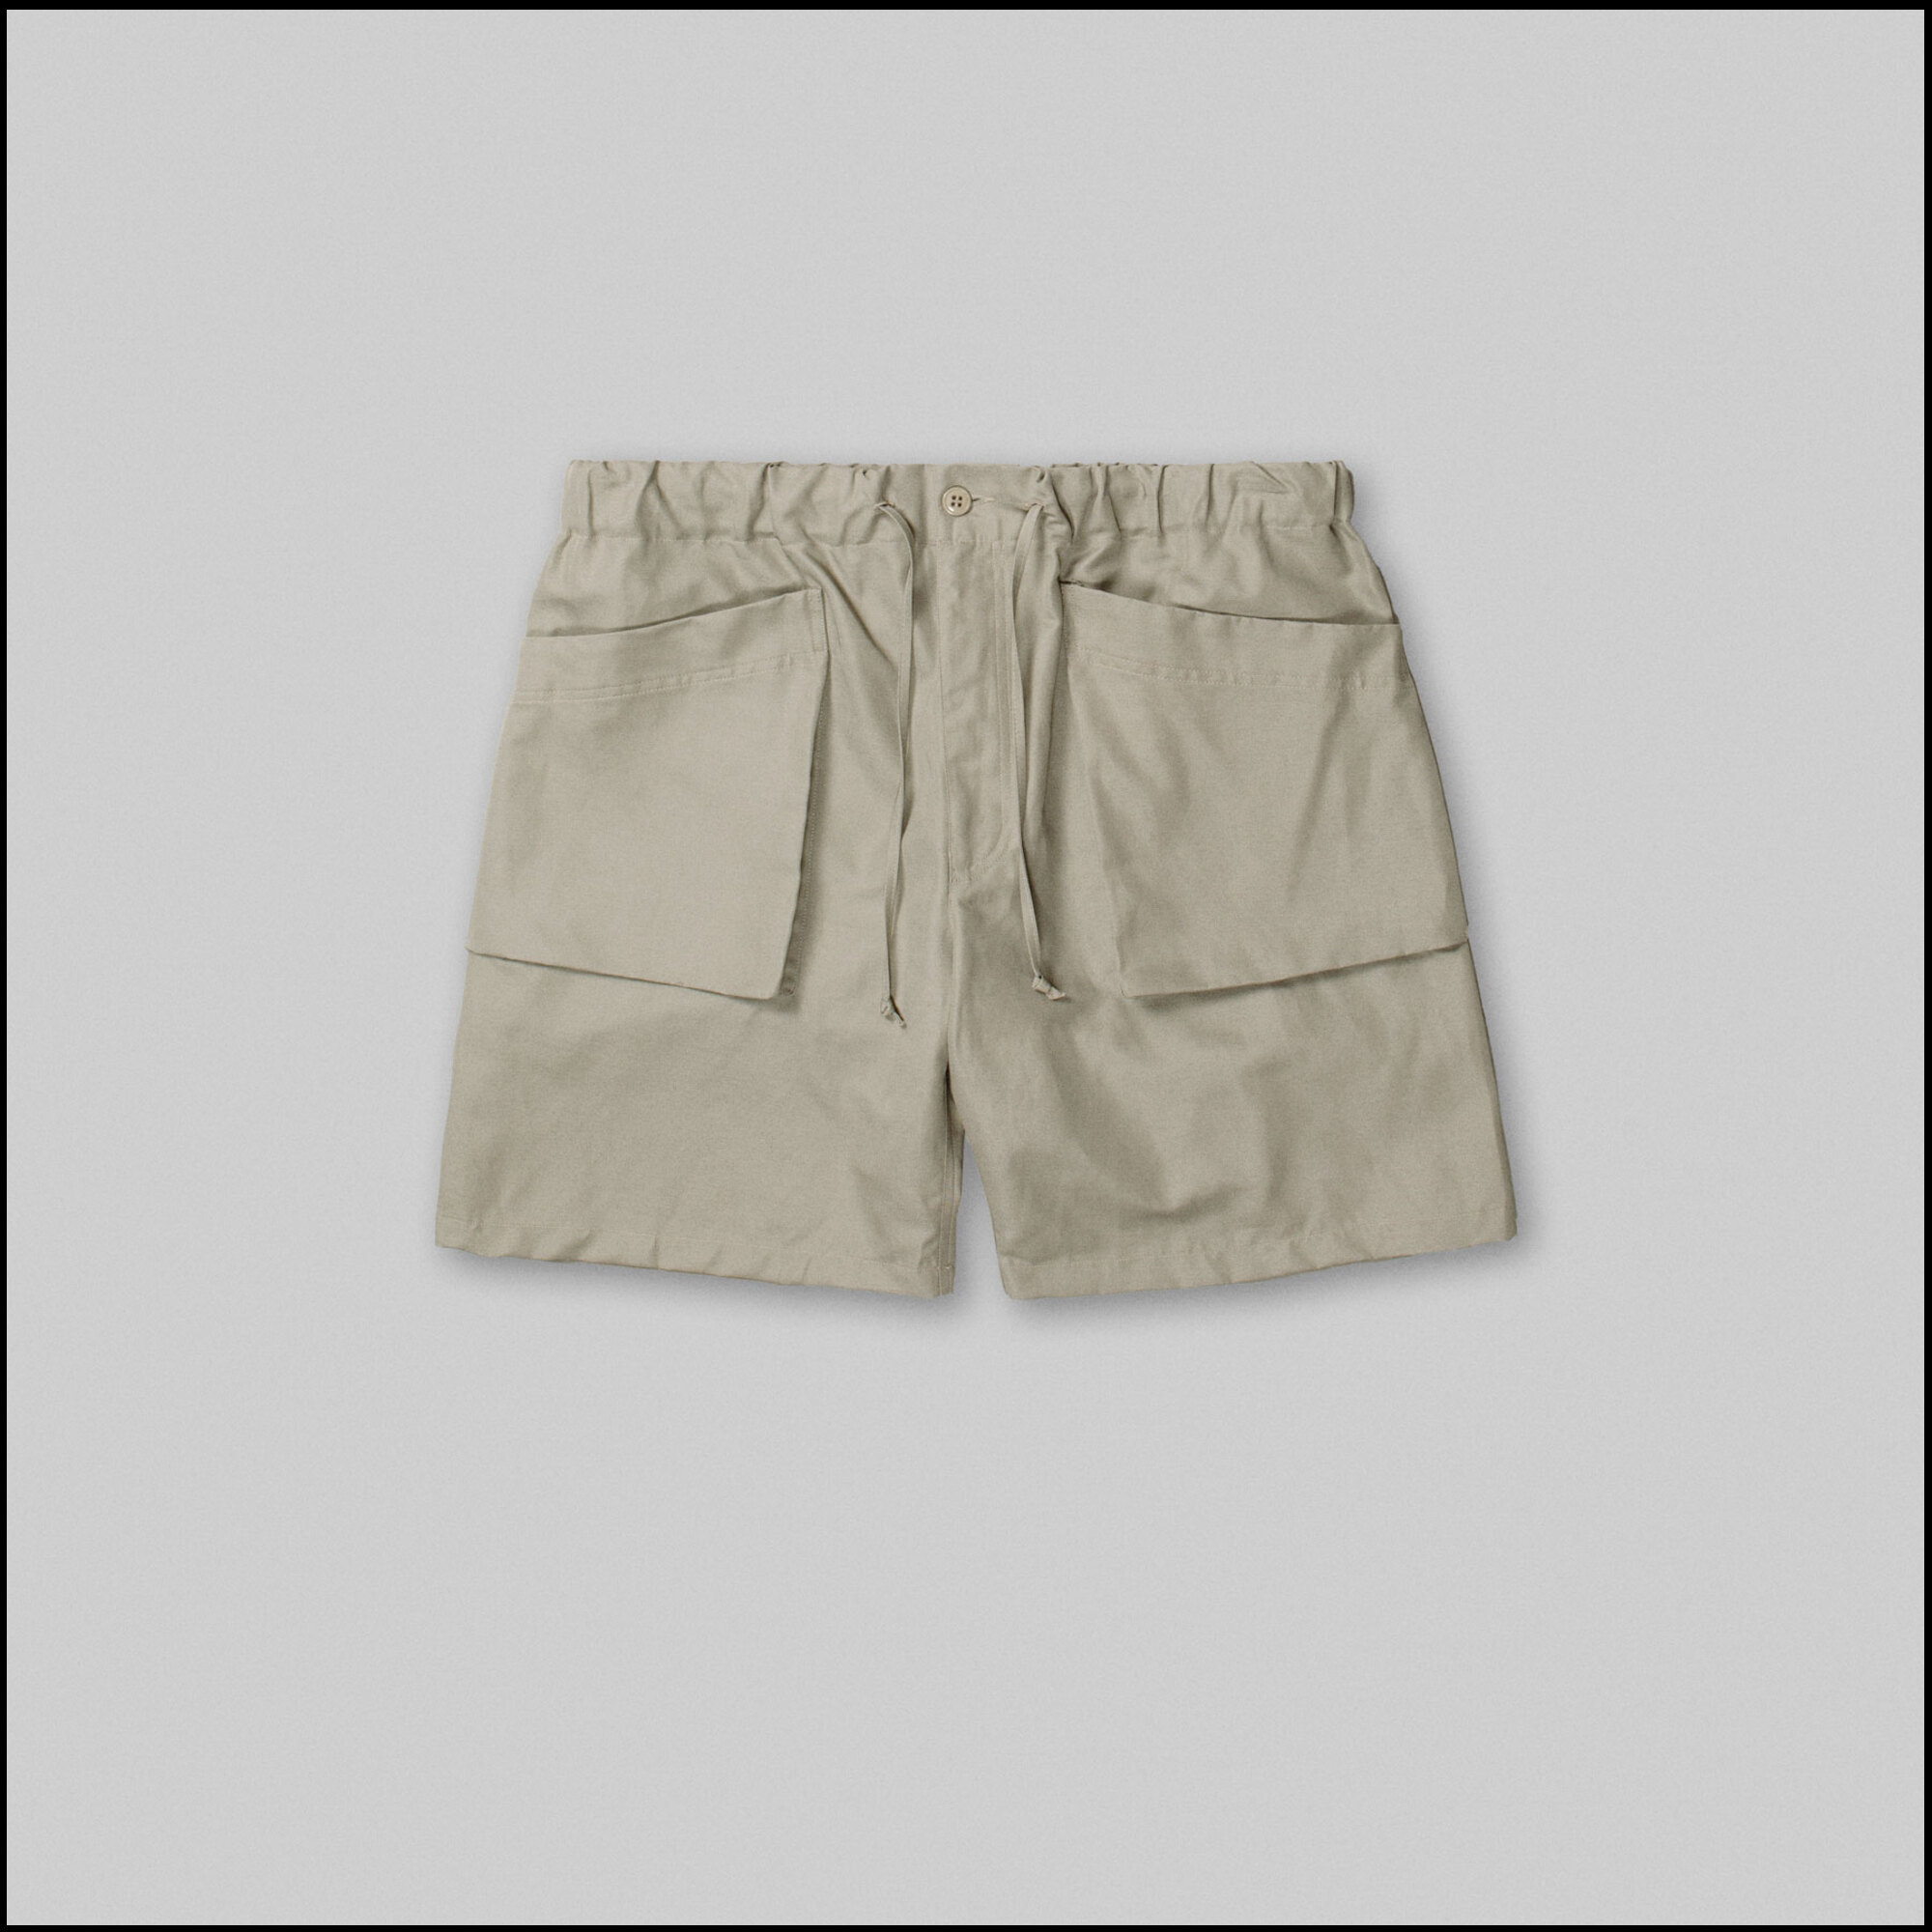 CARGO Shorts by Arpenteur in Sand color